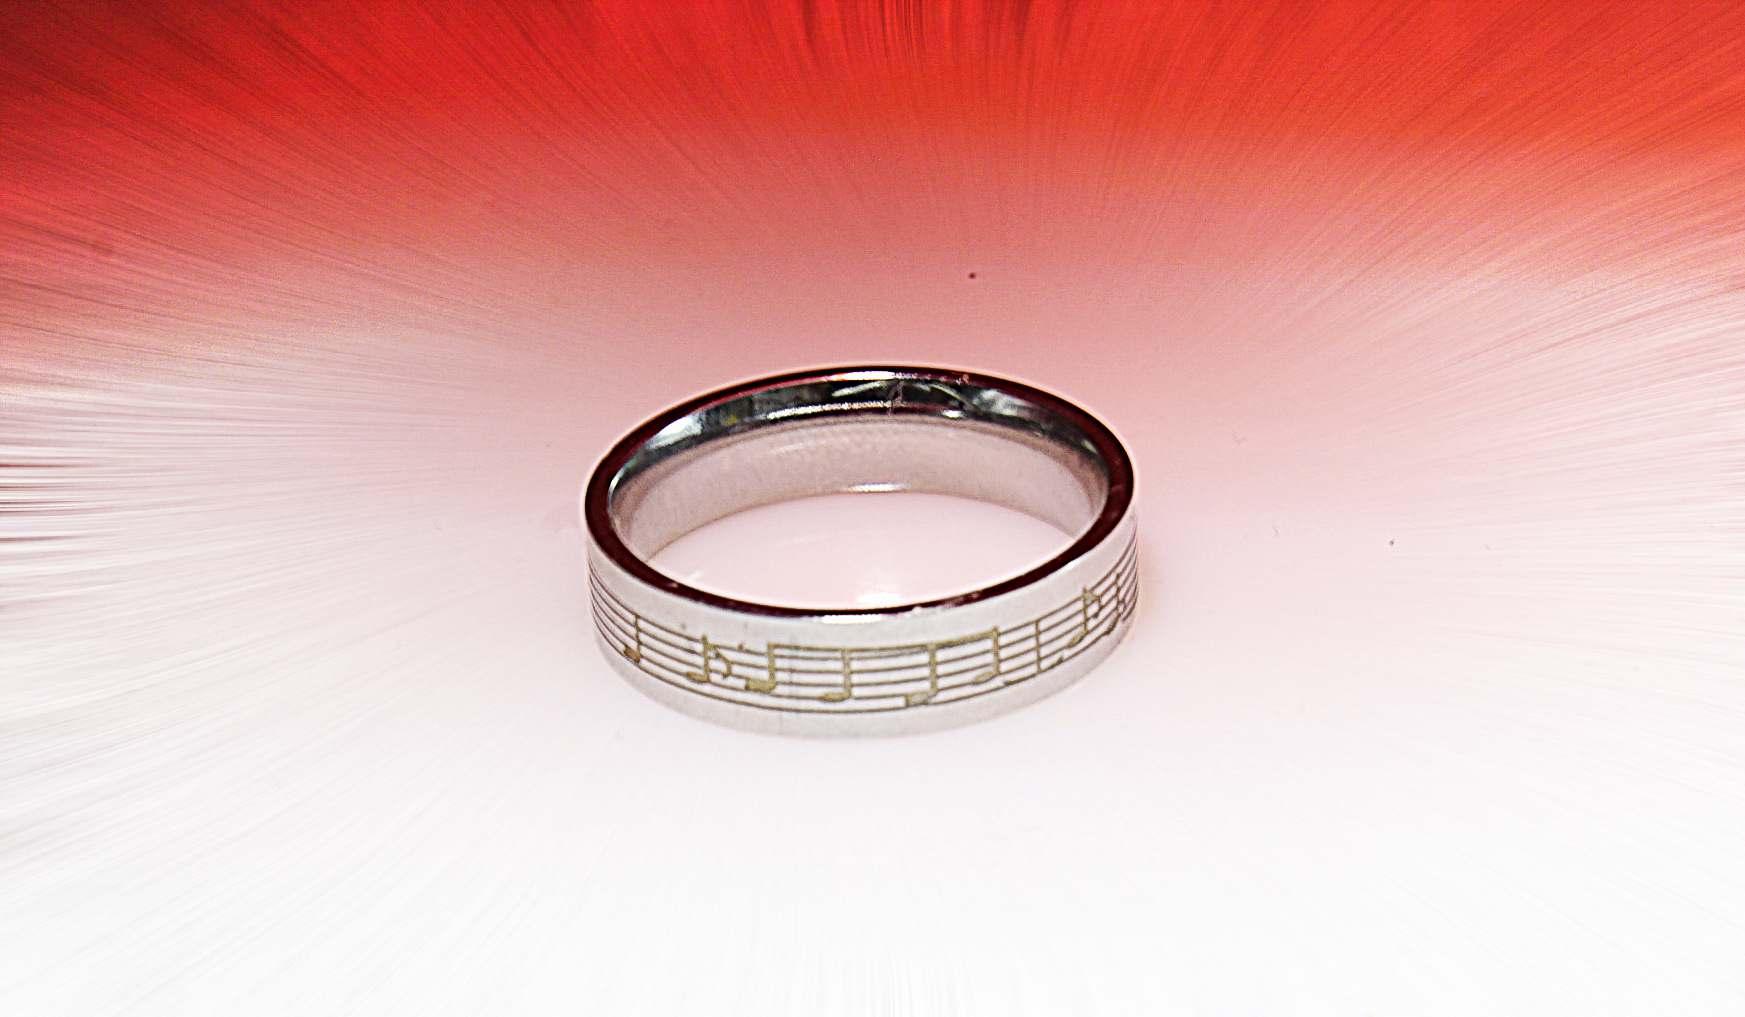 Music Note Ring Stainless Steel With Etched Music Notes